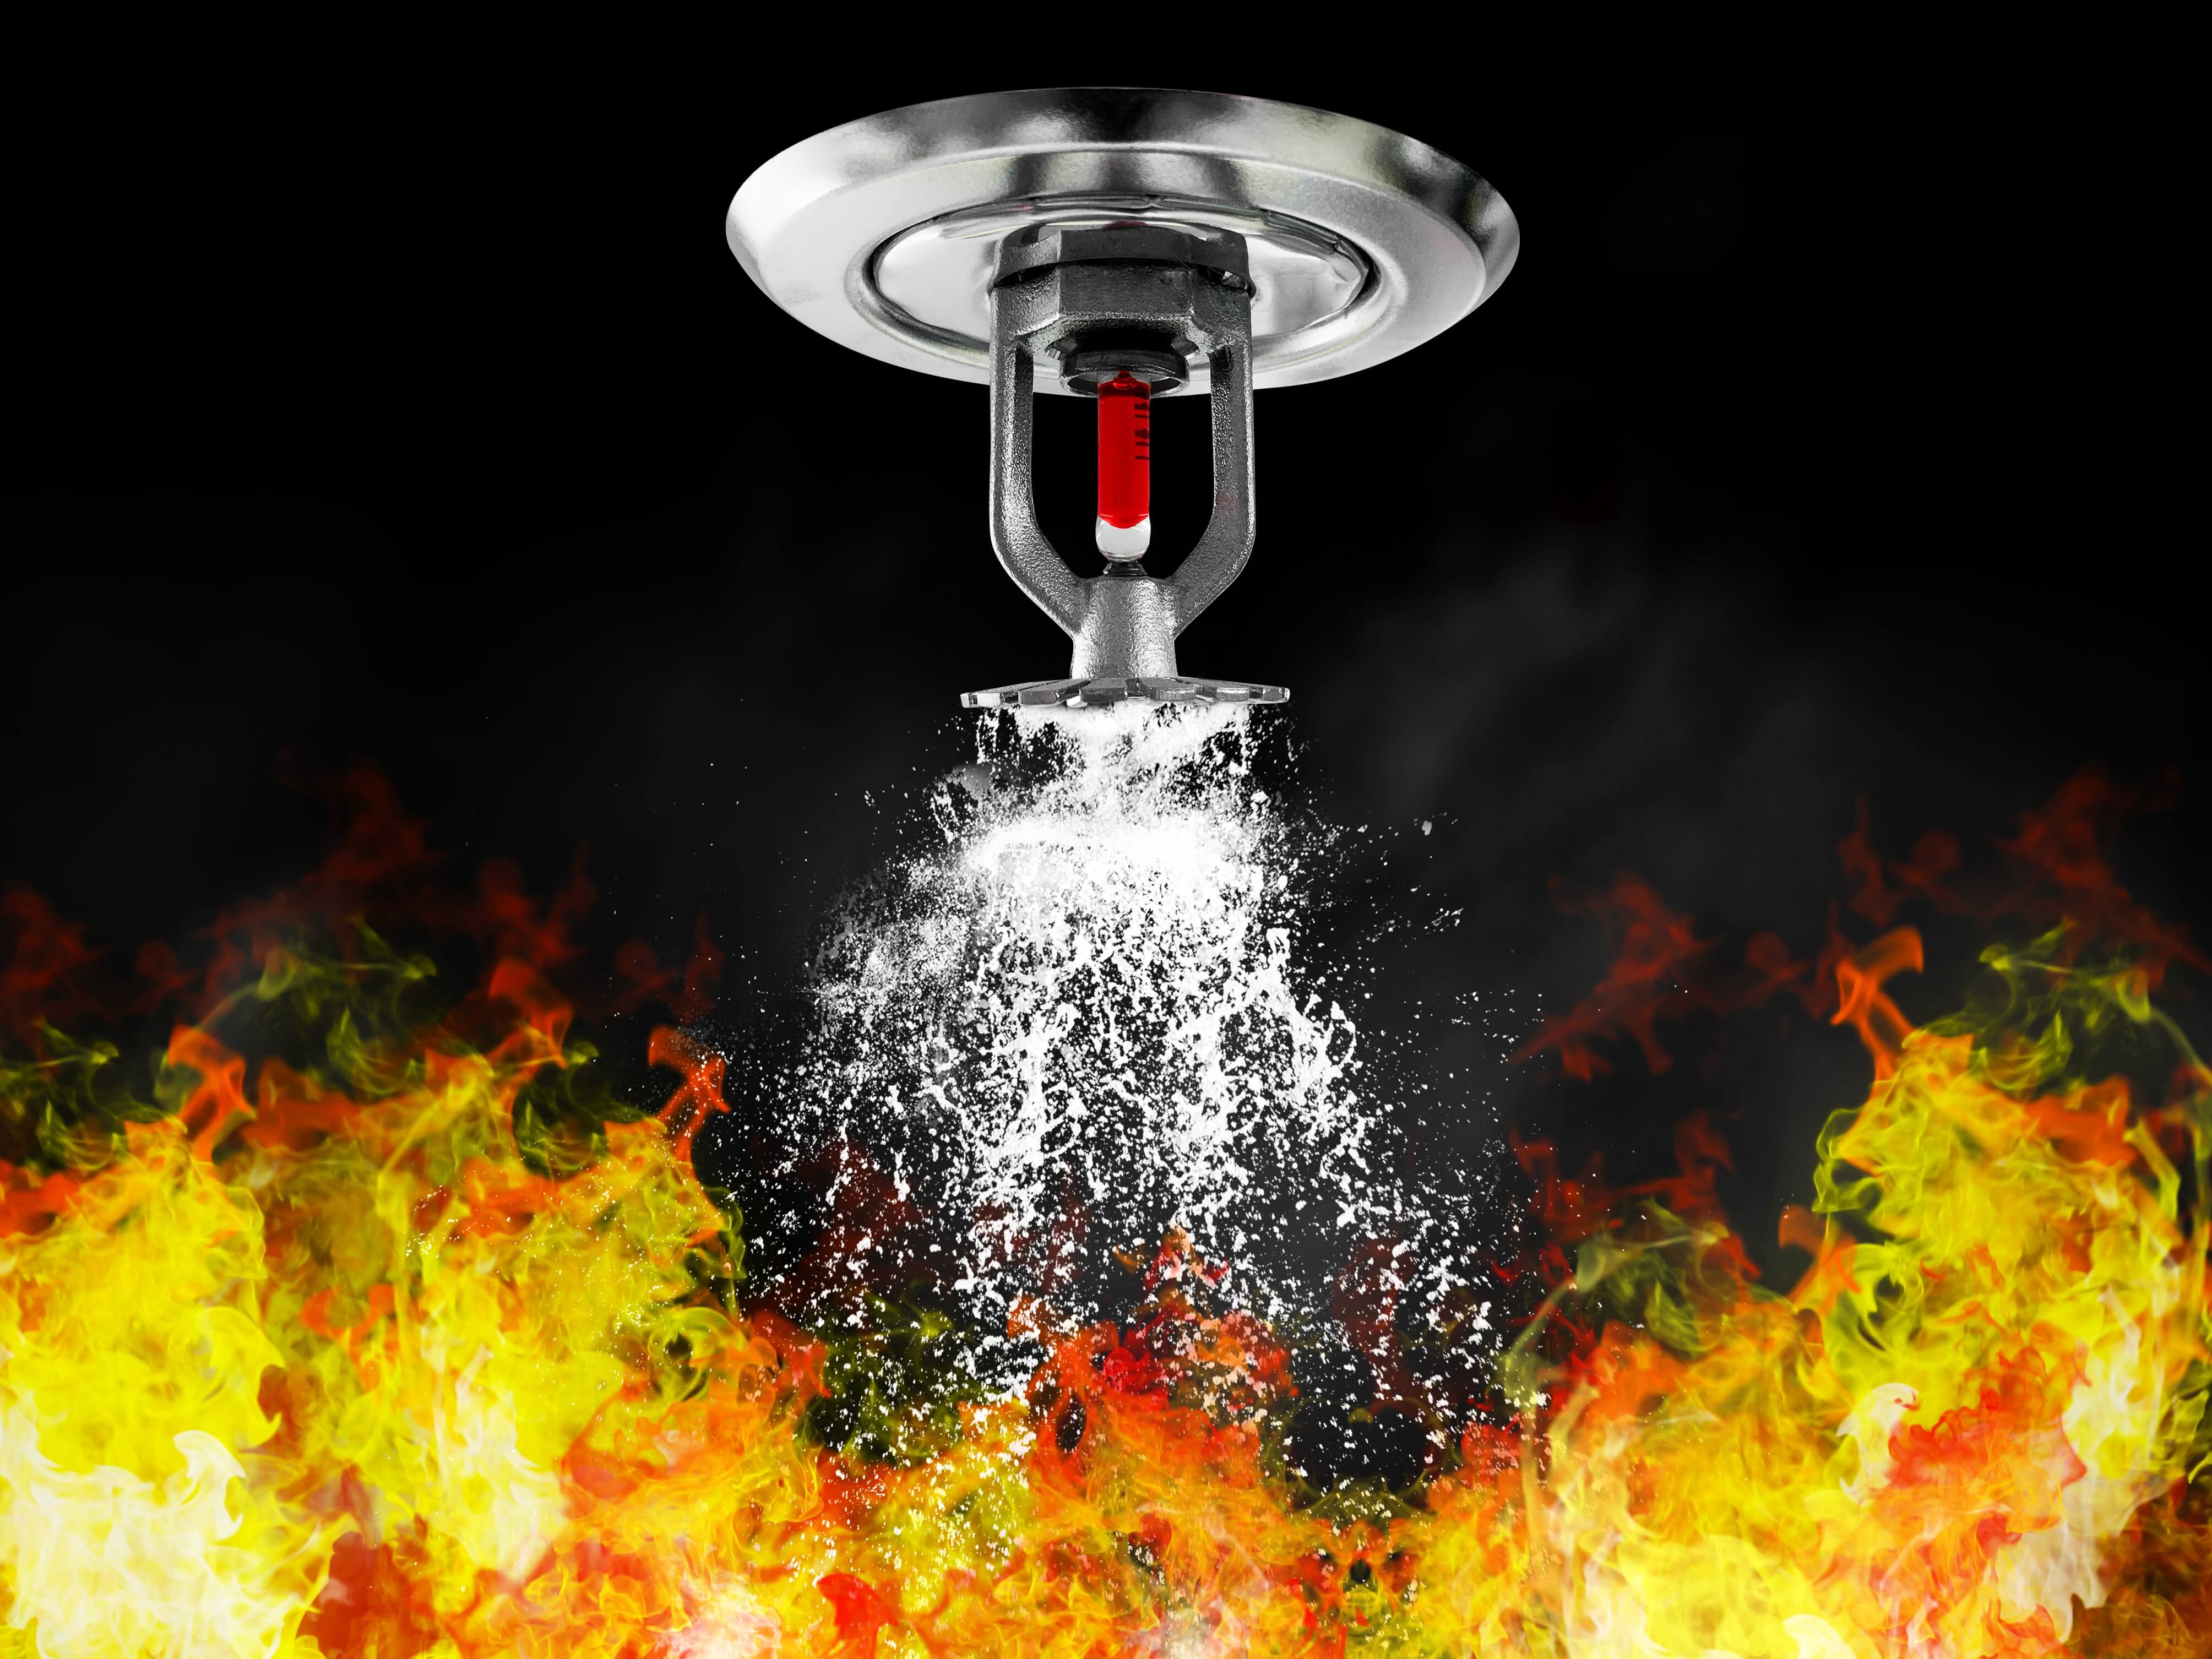 Application of Wet Pipe Sprinkler Systems in Chicago